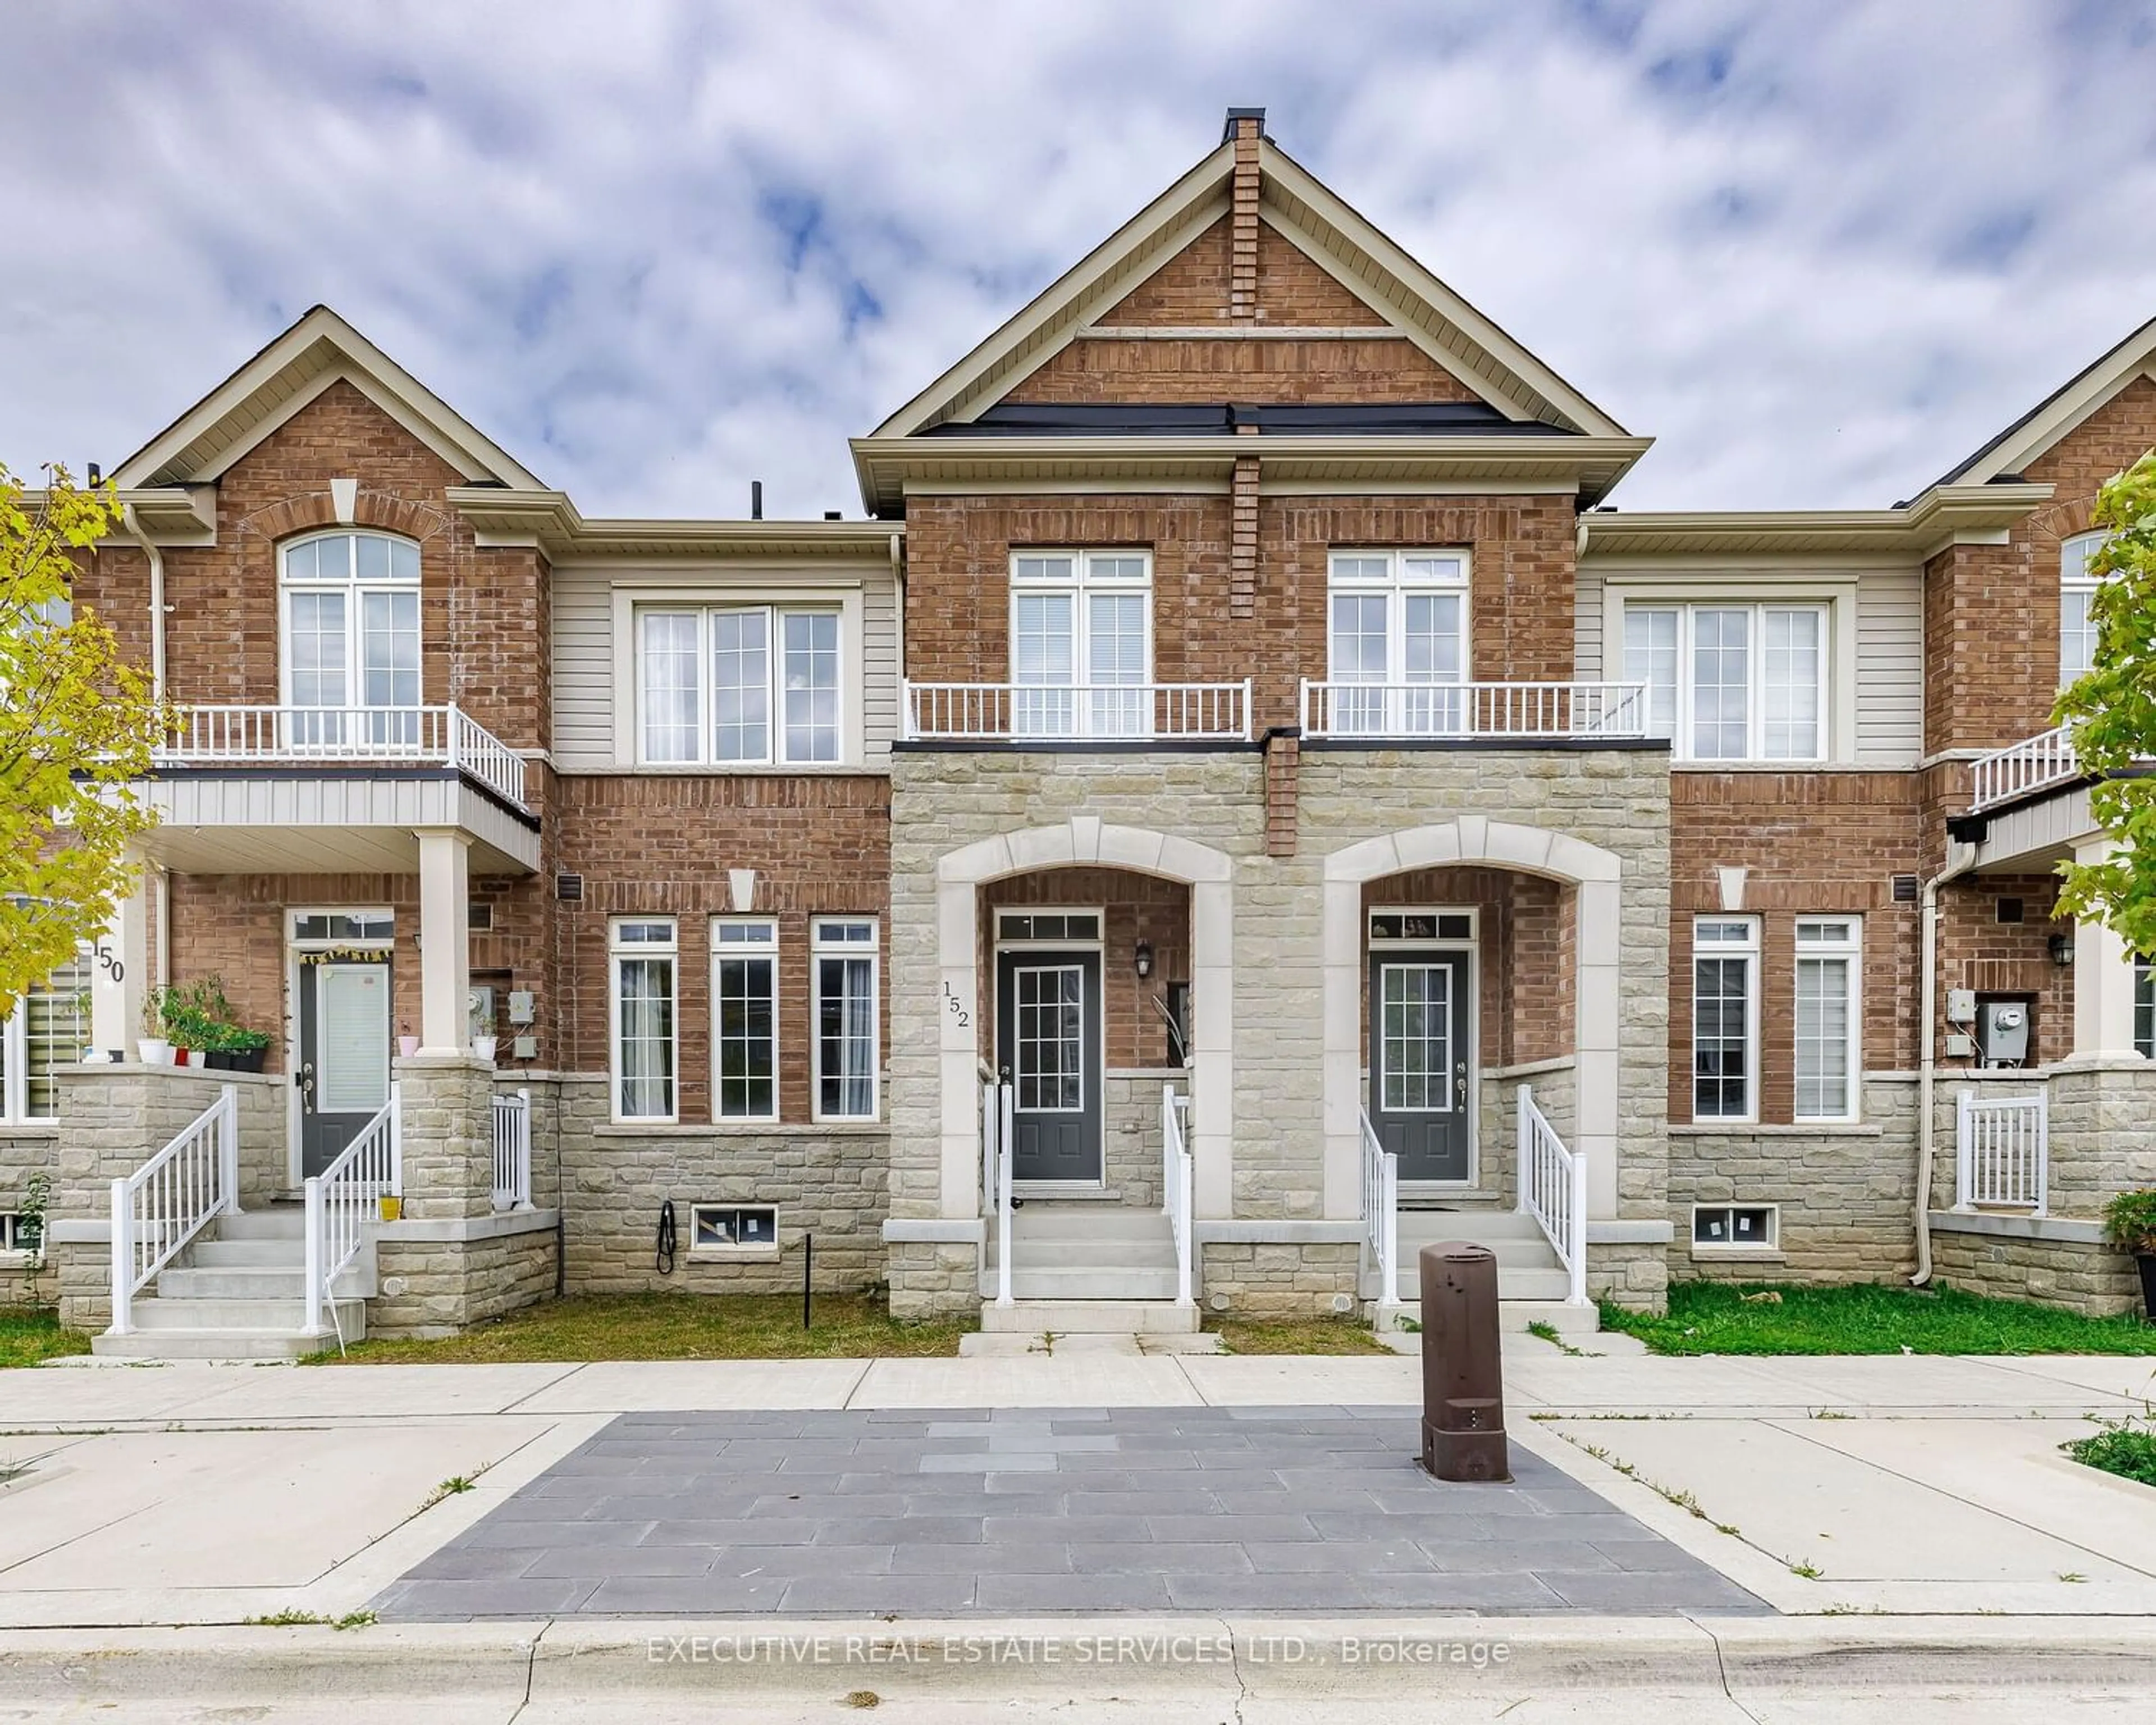 Home with brick exterior material for 152 Remembrance Rd, Brampton Ontario L7A 0G1